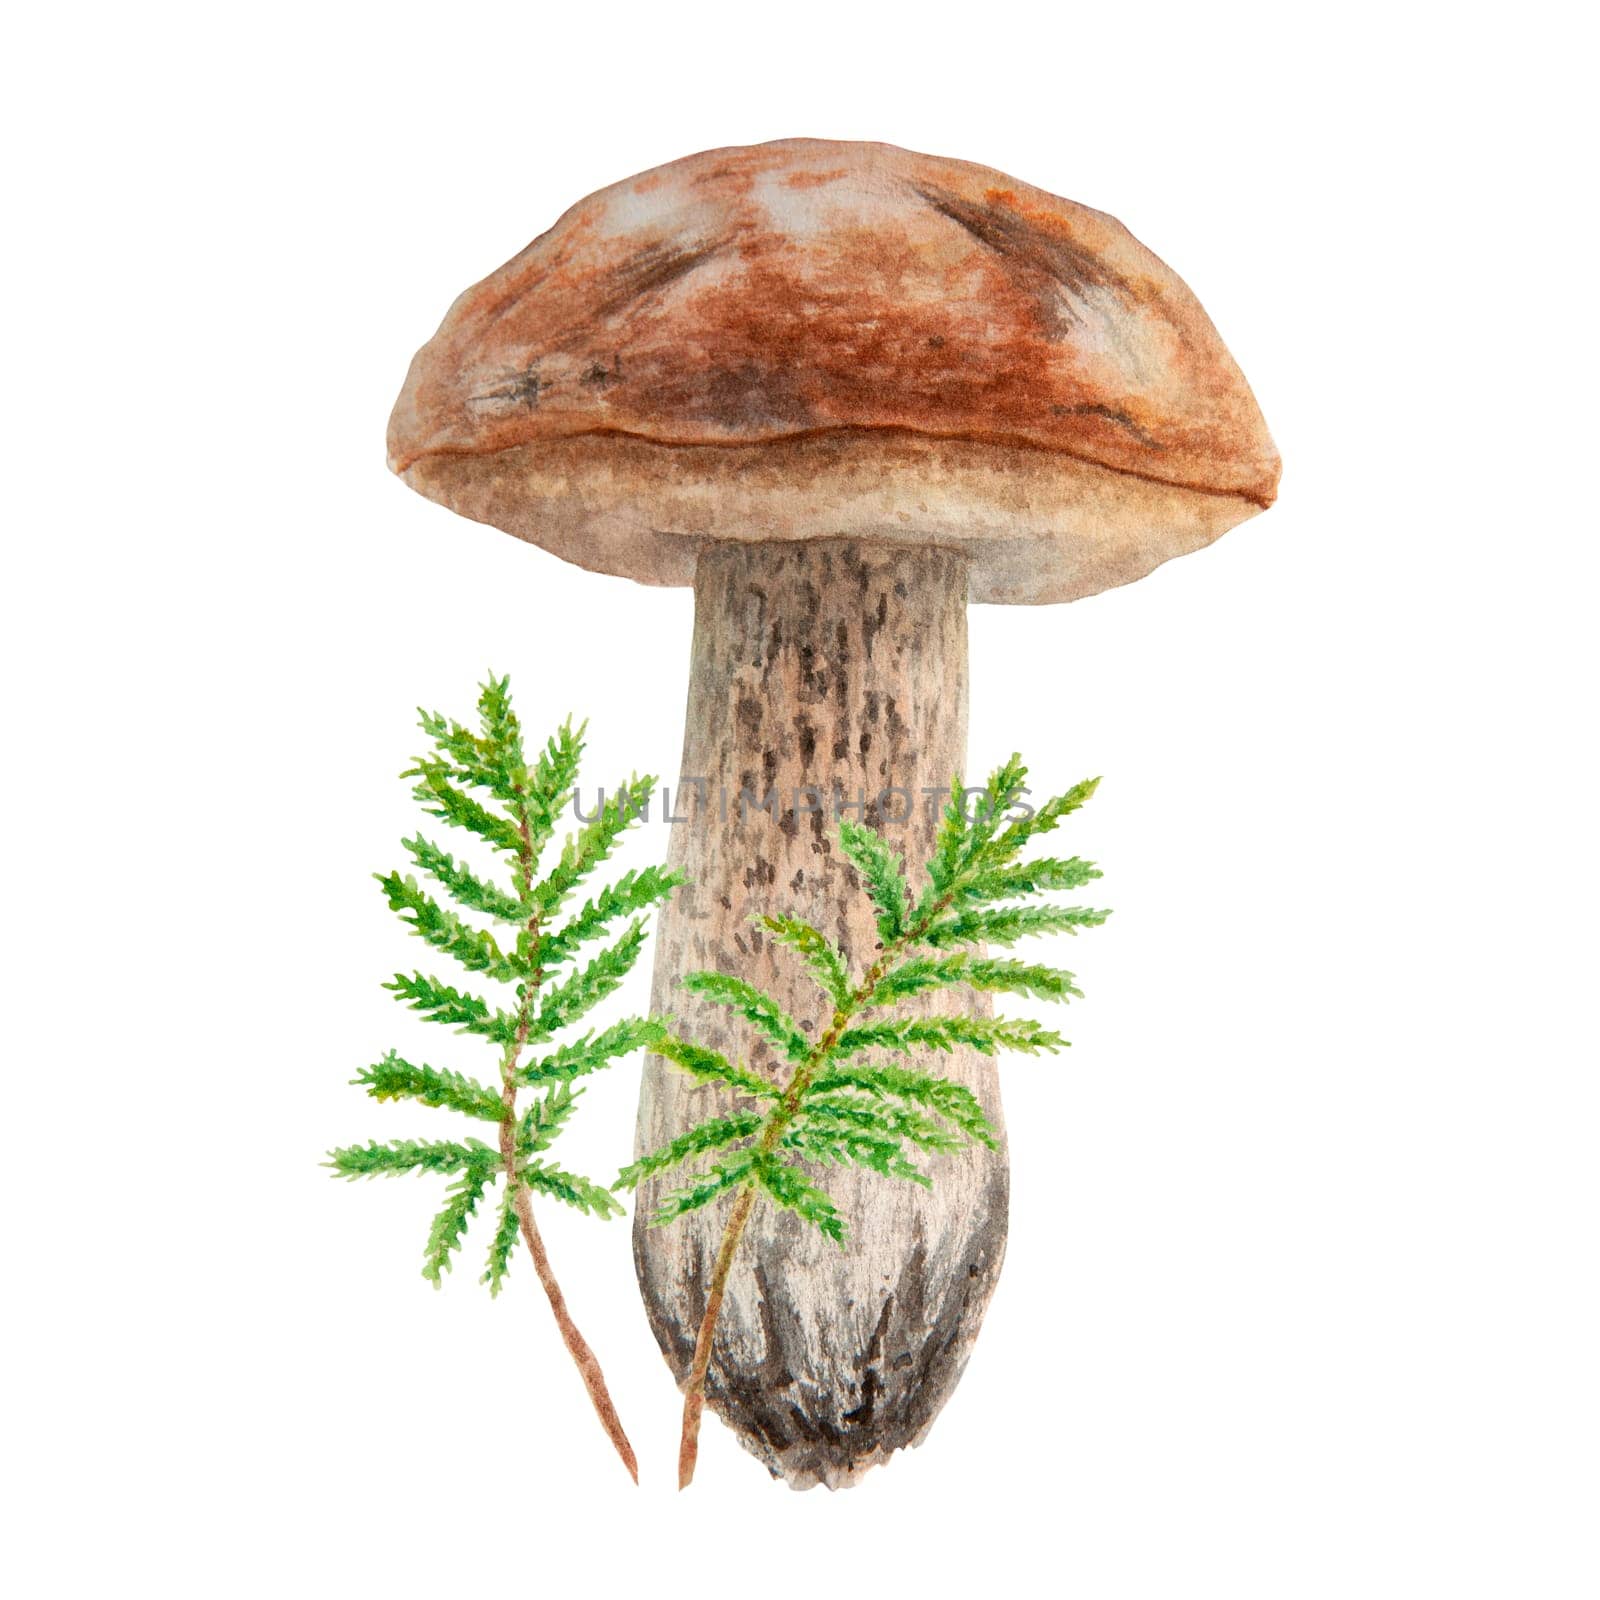 Wild mushroom and moss watercolor hand drawn botanical realistic illustration. Forest boletus isolated on white background. Great for printing on fabric, postcards, invitations, menus by florainlove_art